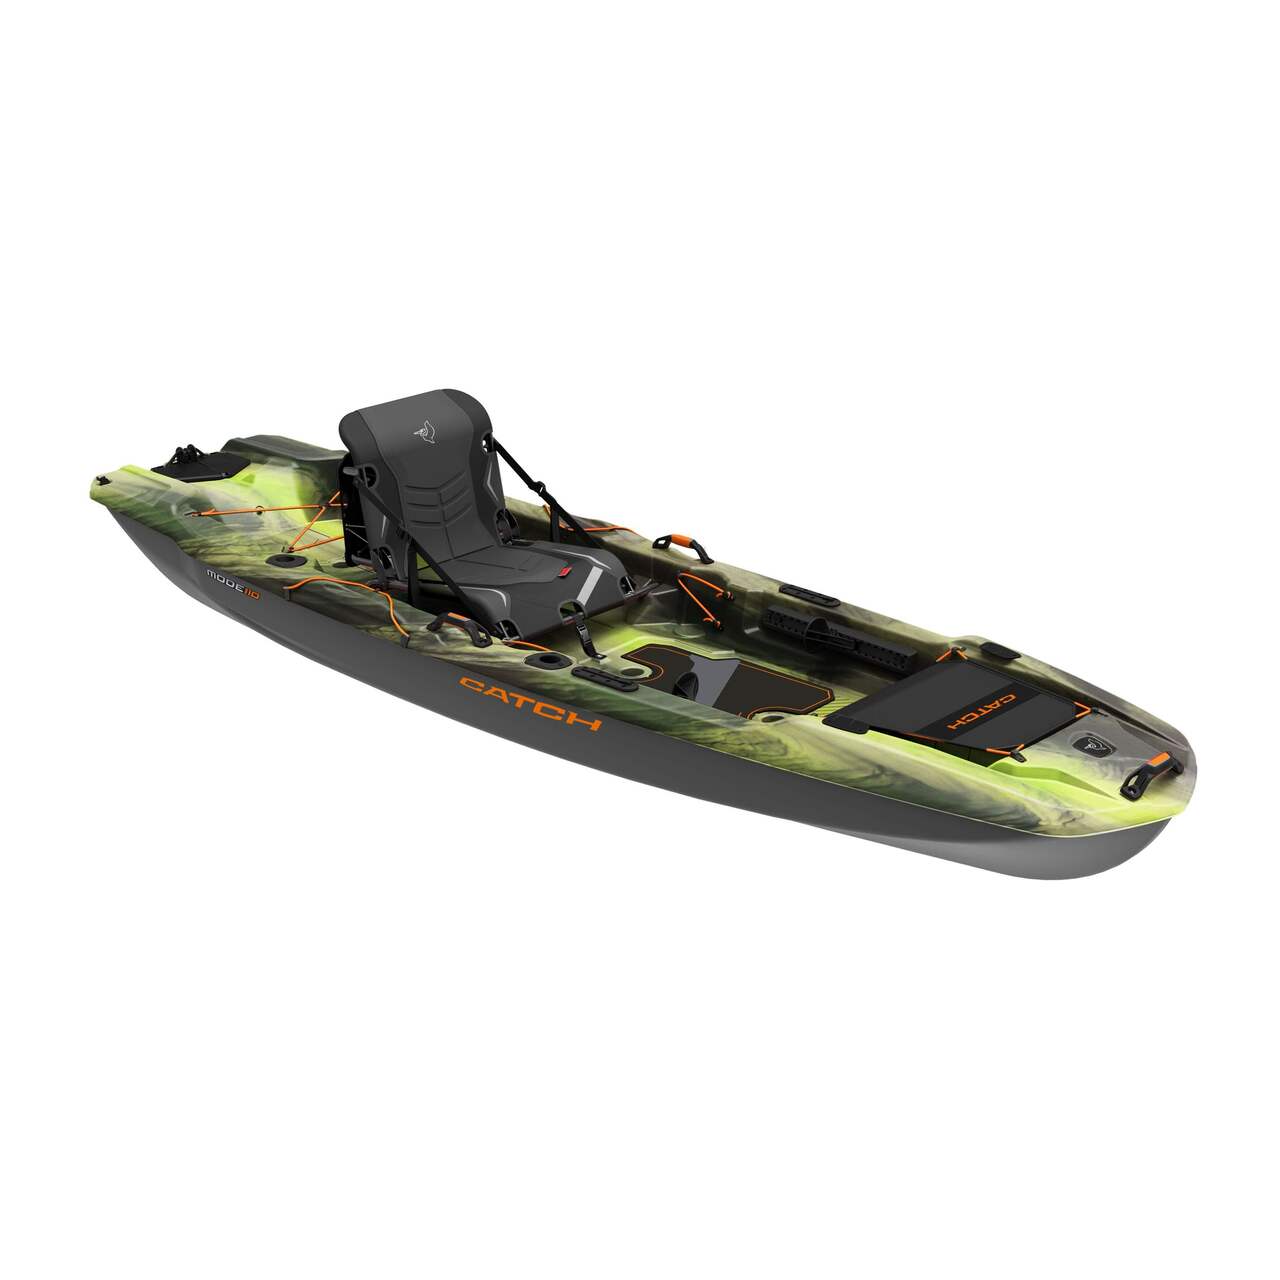 Pelican Catch Mode 110 Fishing Kayak with Accessories, 1-Person, Camouflage